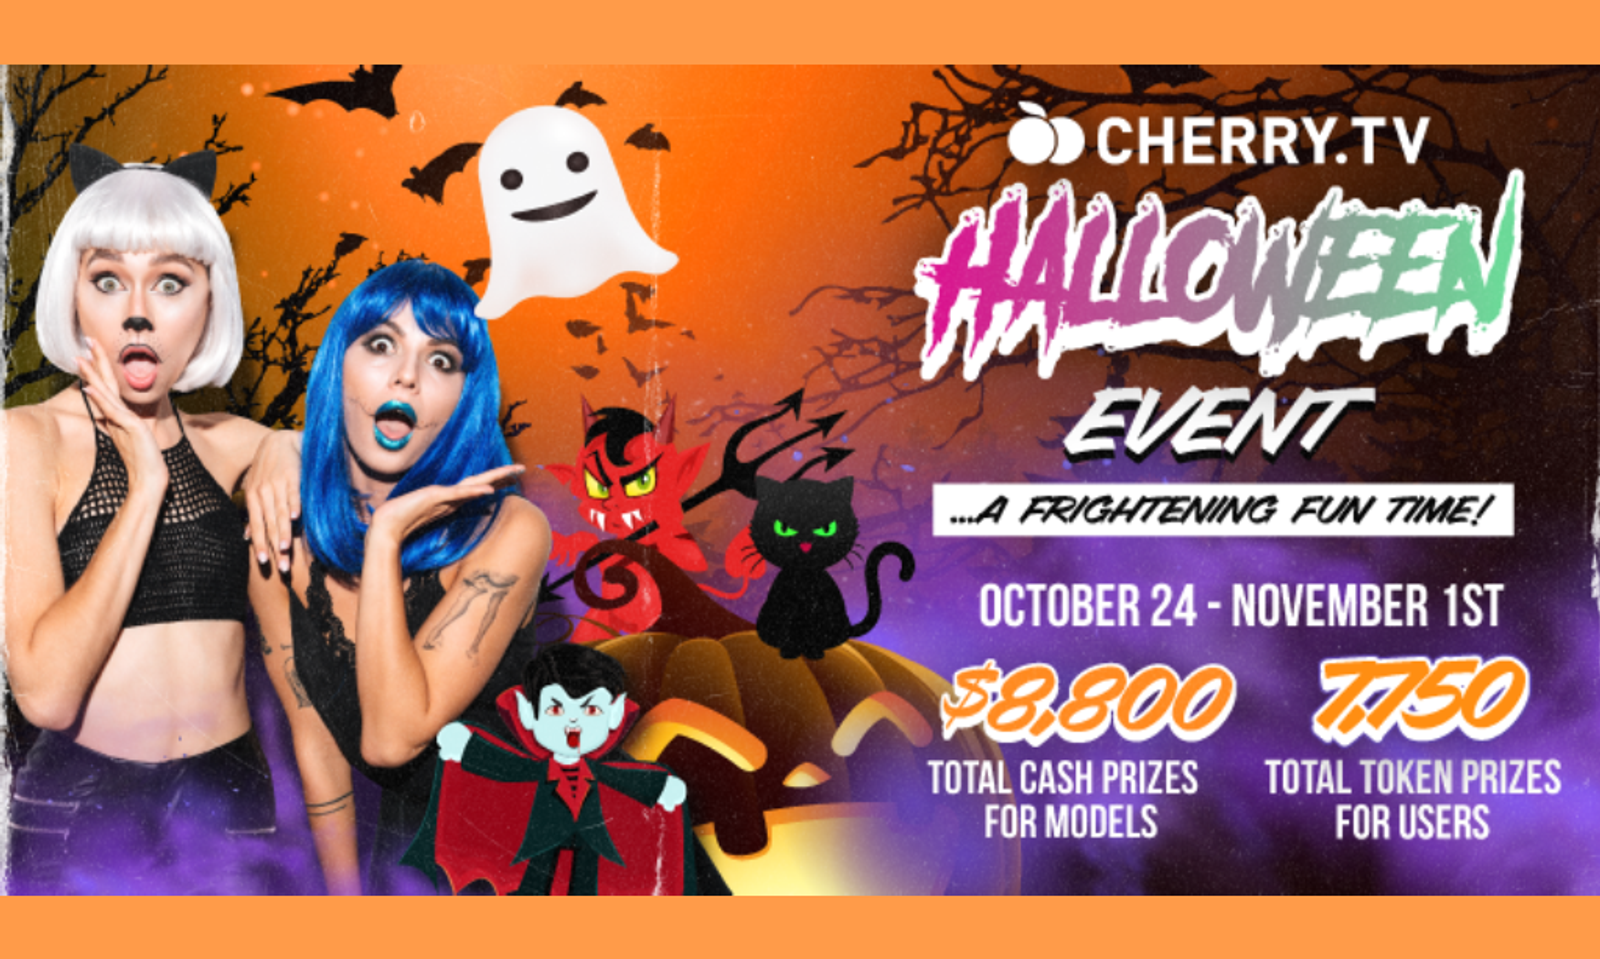 Cherry.tv Announces Halloween Competition for Models and Fans